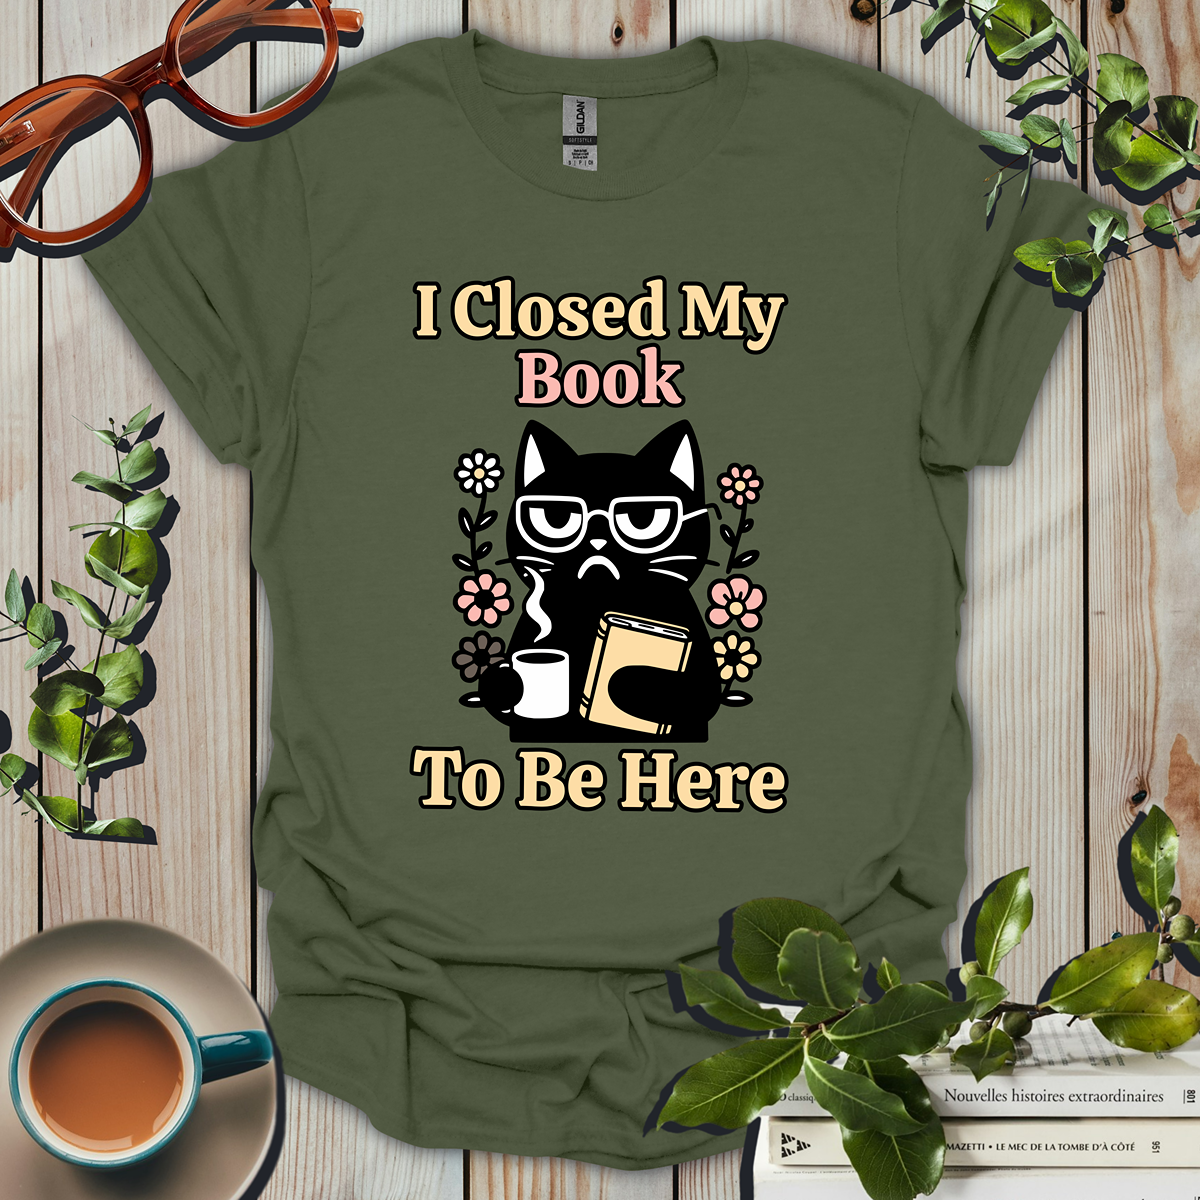 I Closed My Book To Be Here Funny T-Shirt